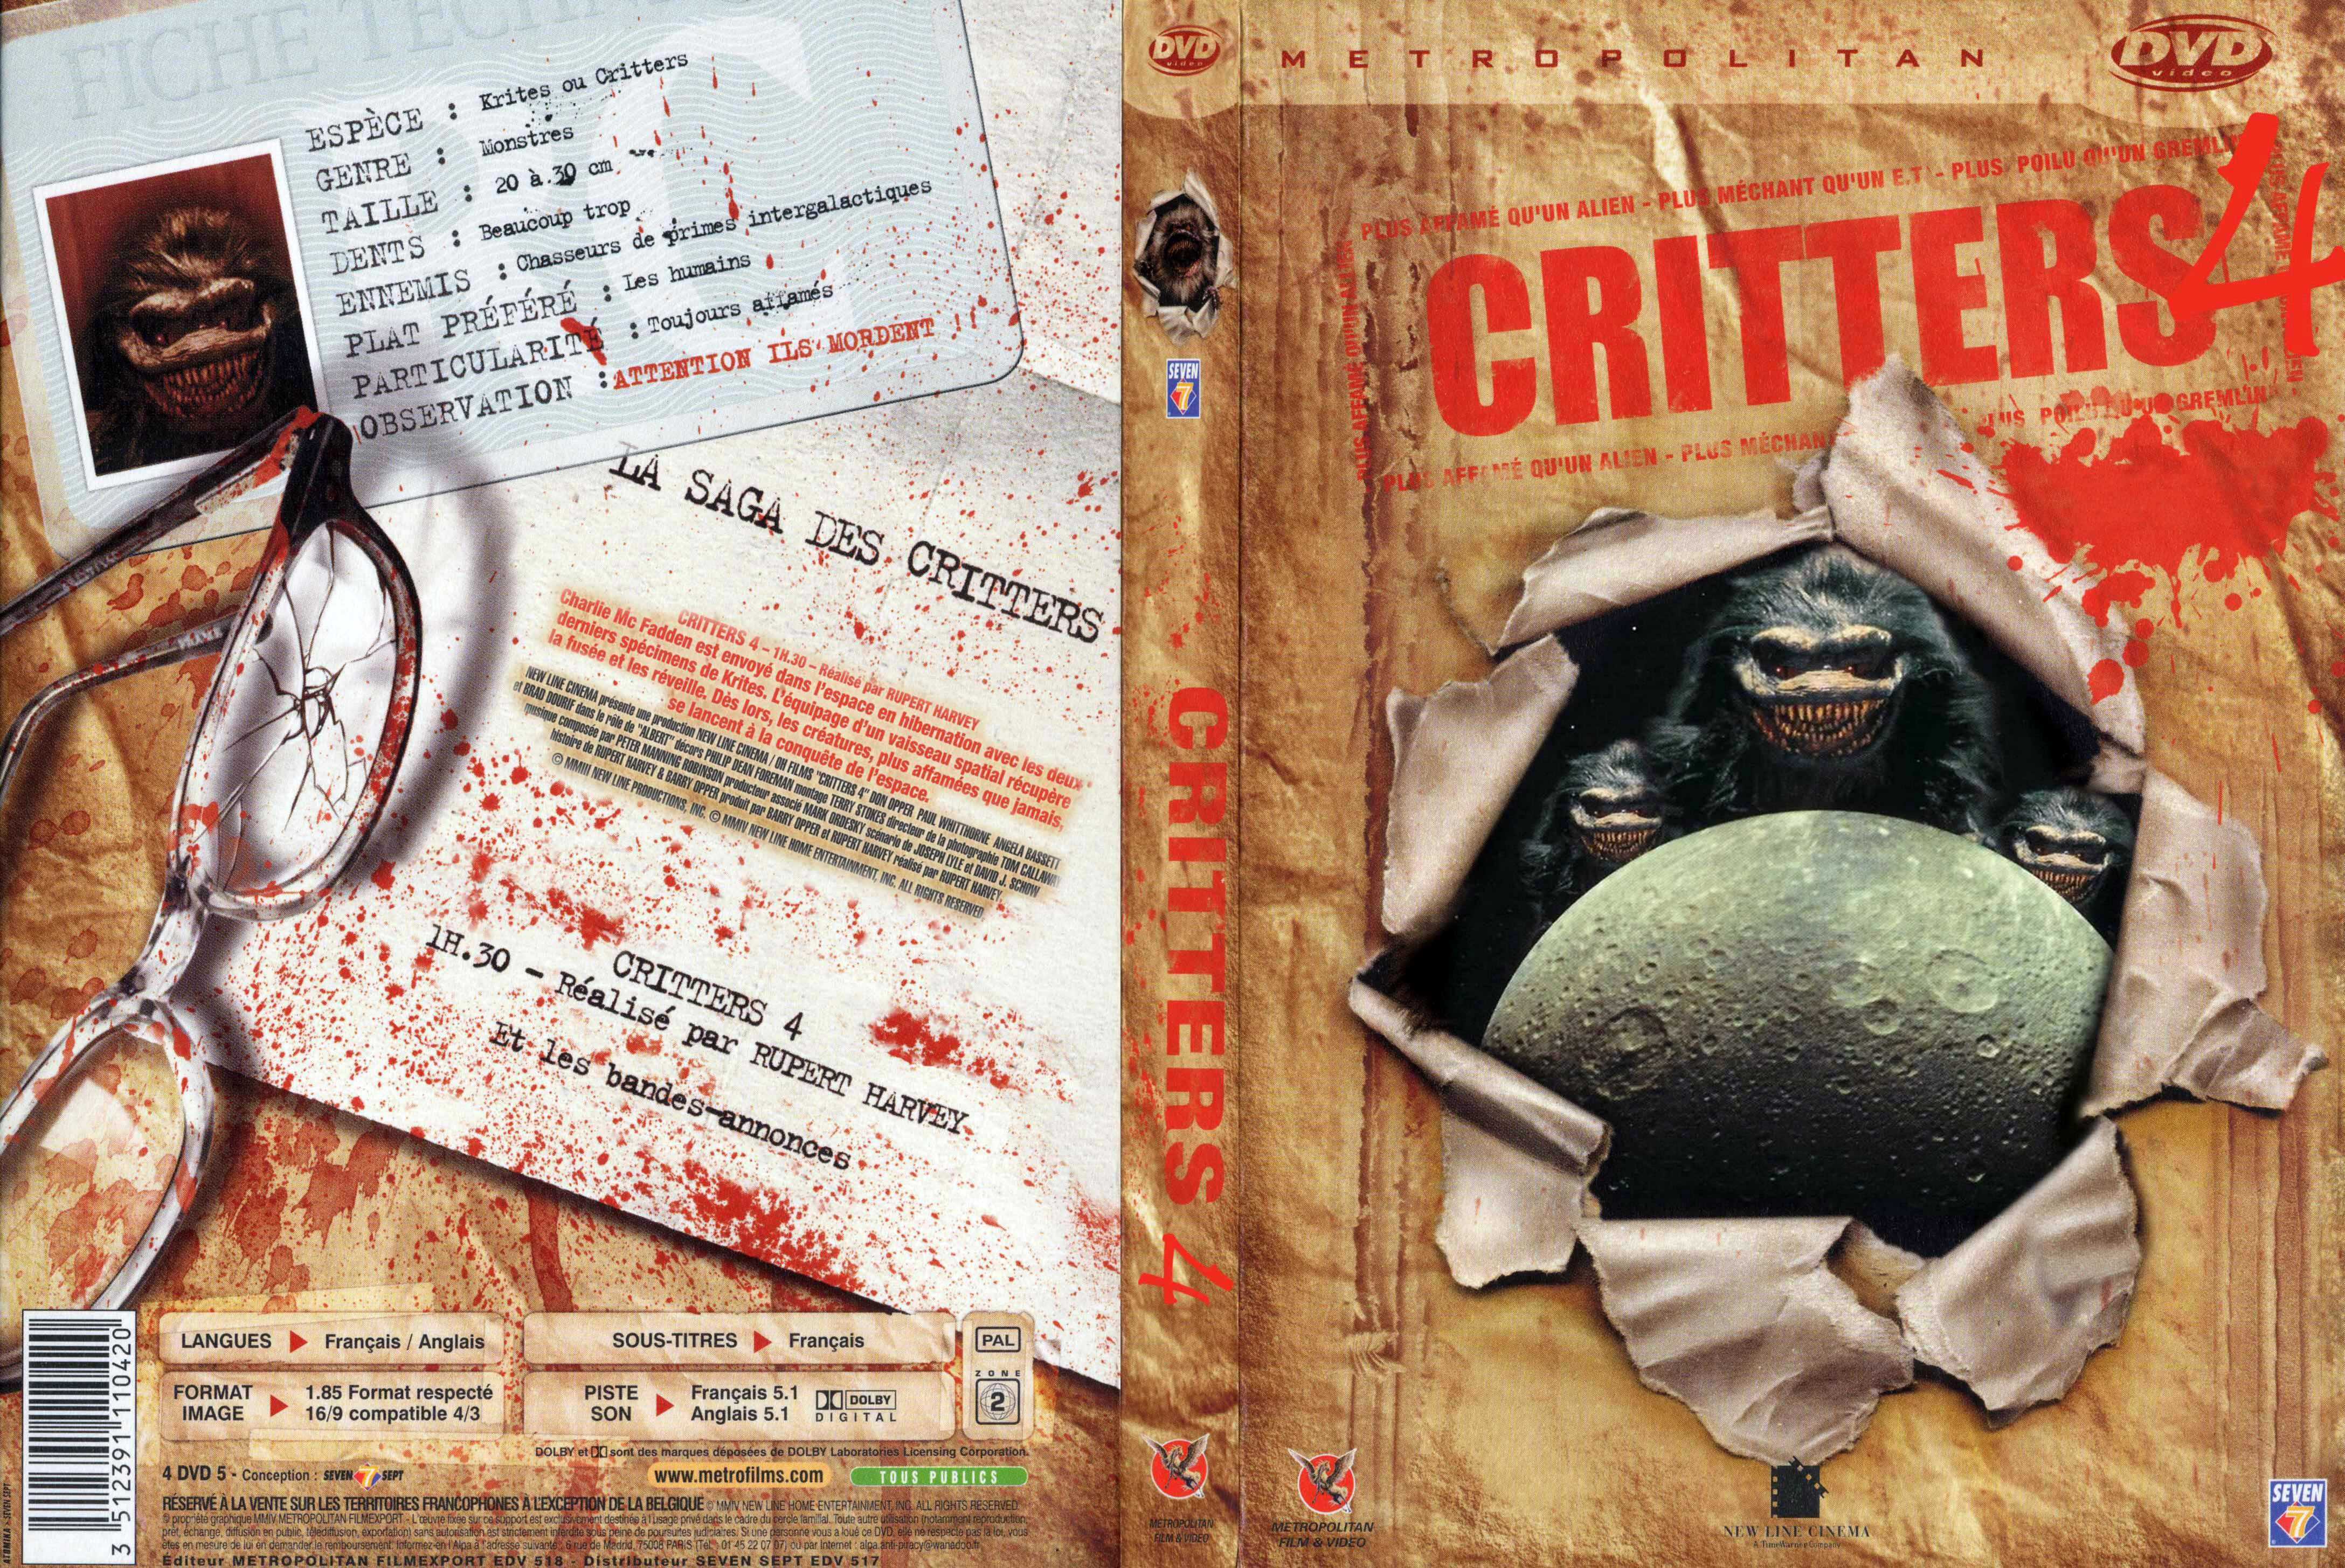 Jaquette DVD Critters 4